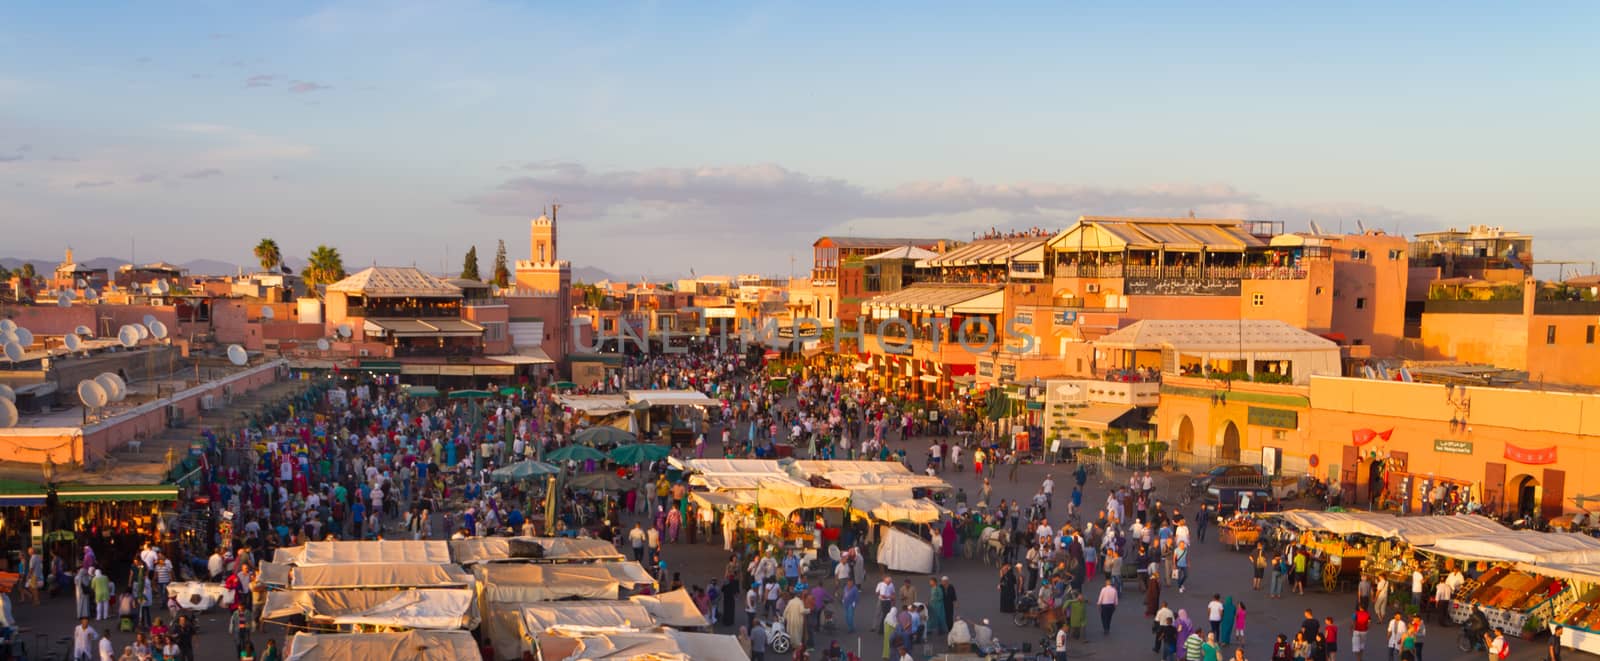 Jamaa el Fna also Jemaa el Fnaa, Djema el Fna or Djemaa el Fnaa is a square and market place in Marrakesh's medina quarter. Marrakesh, Morocco, north Africa. UNESCO Masterpiece of the Oral and Intangible Heritage of Humanity.